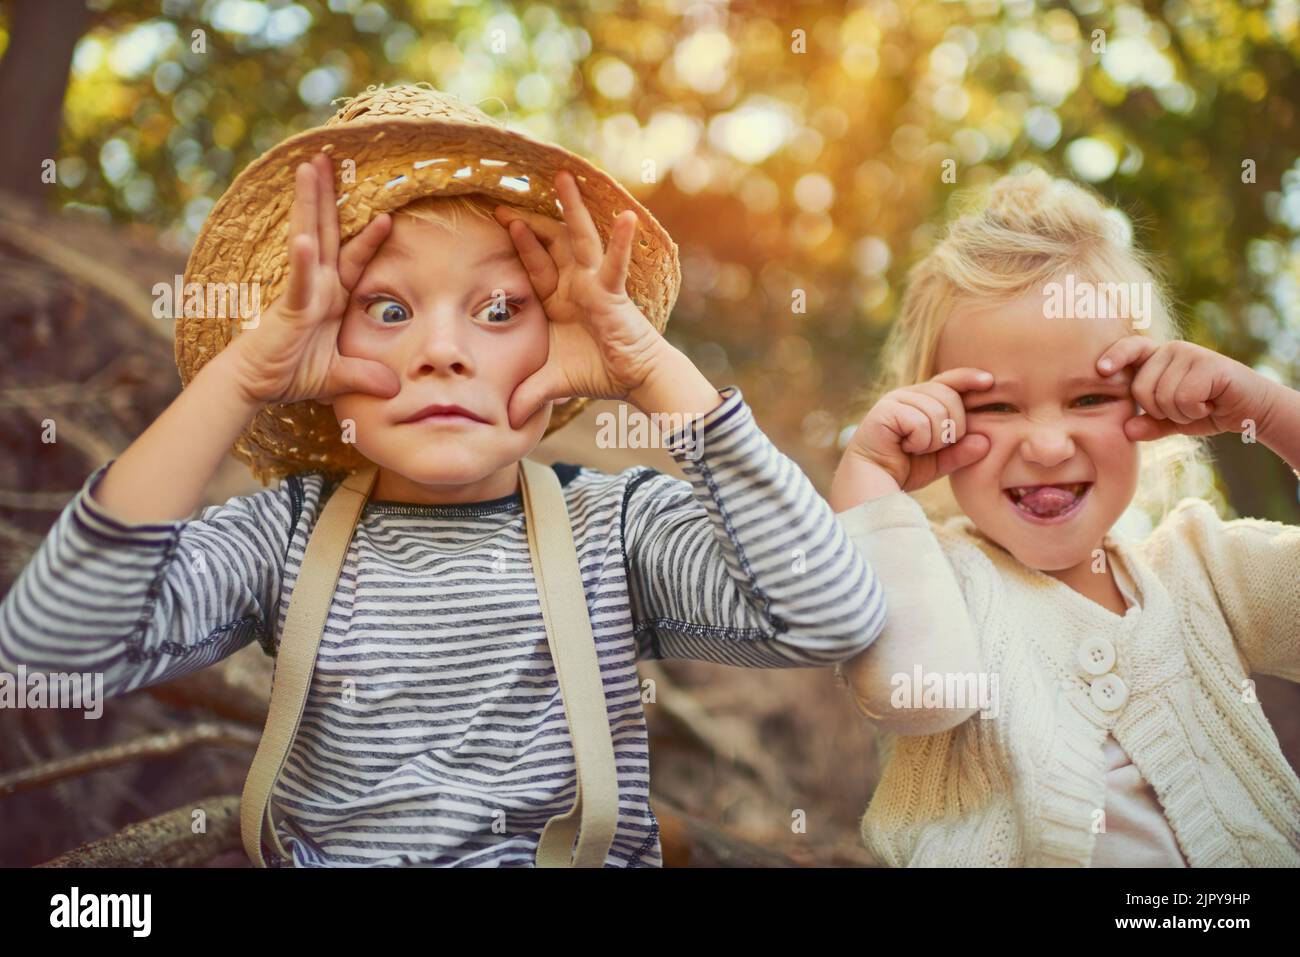 Showing off their funny character. Portrait of two little children playing together outdoors. Stock Photo